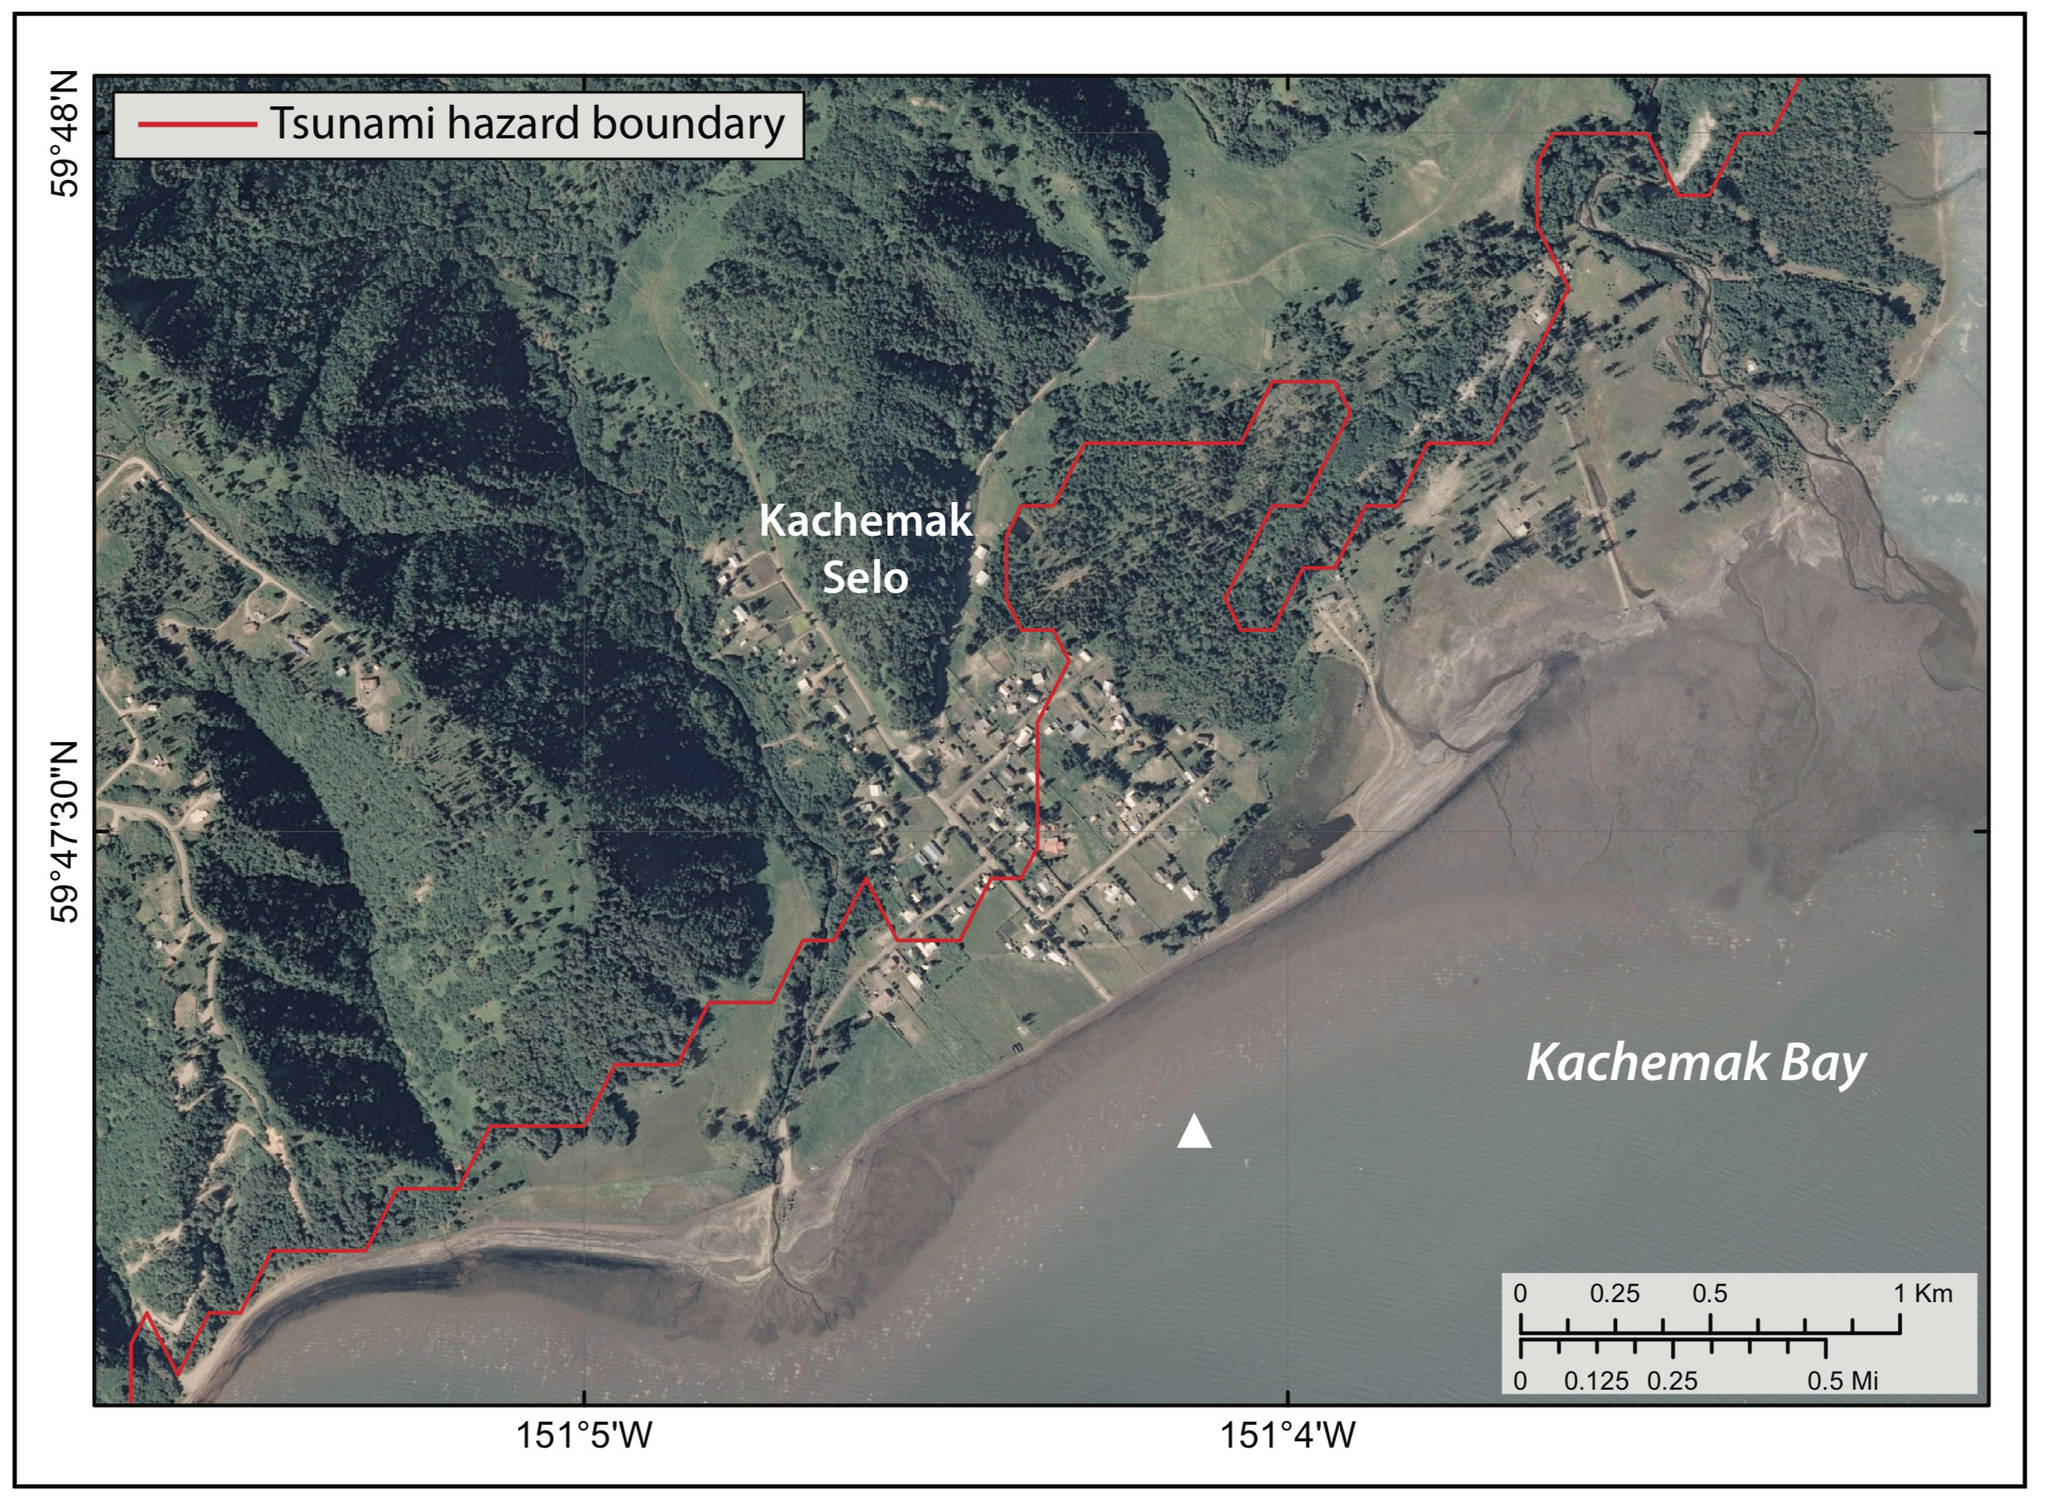 The red line shows the tsunami hazard boundary for Kachemak Selo. (Illustration by Alaska Division of Geological and Geophysical Surveys)